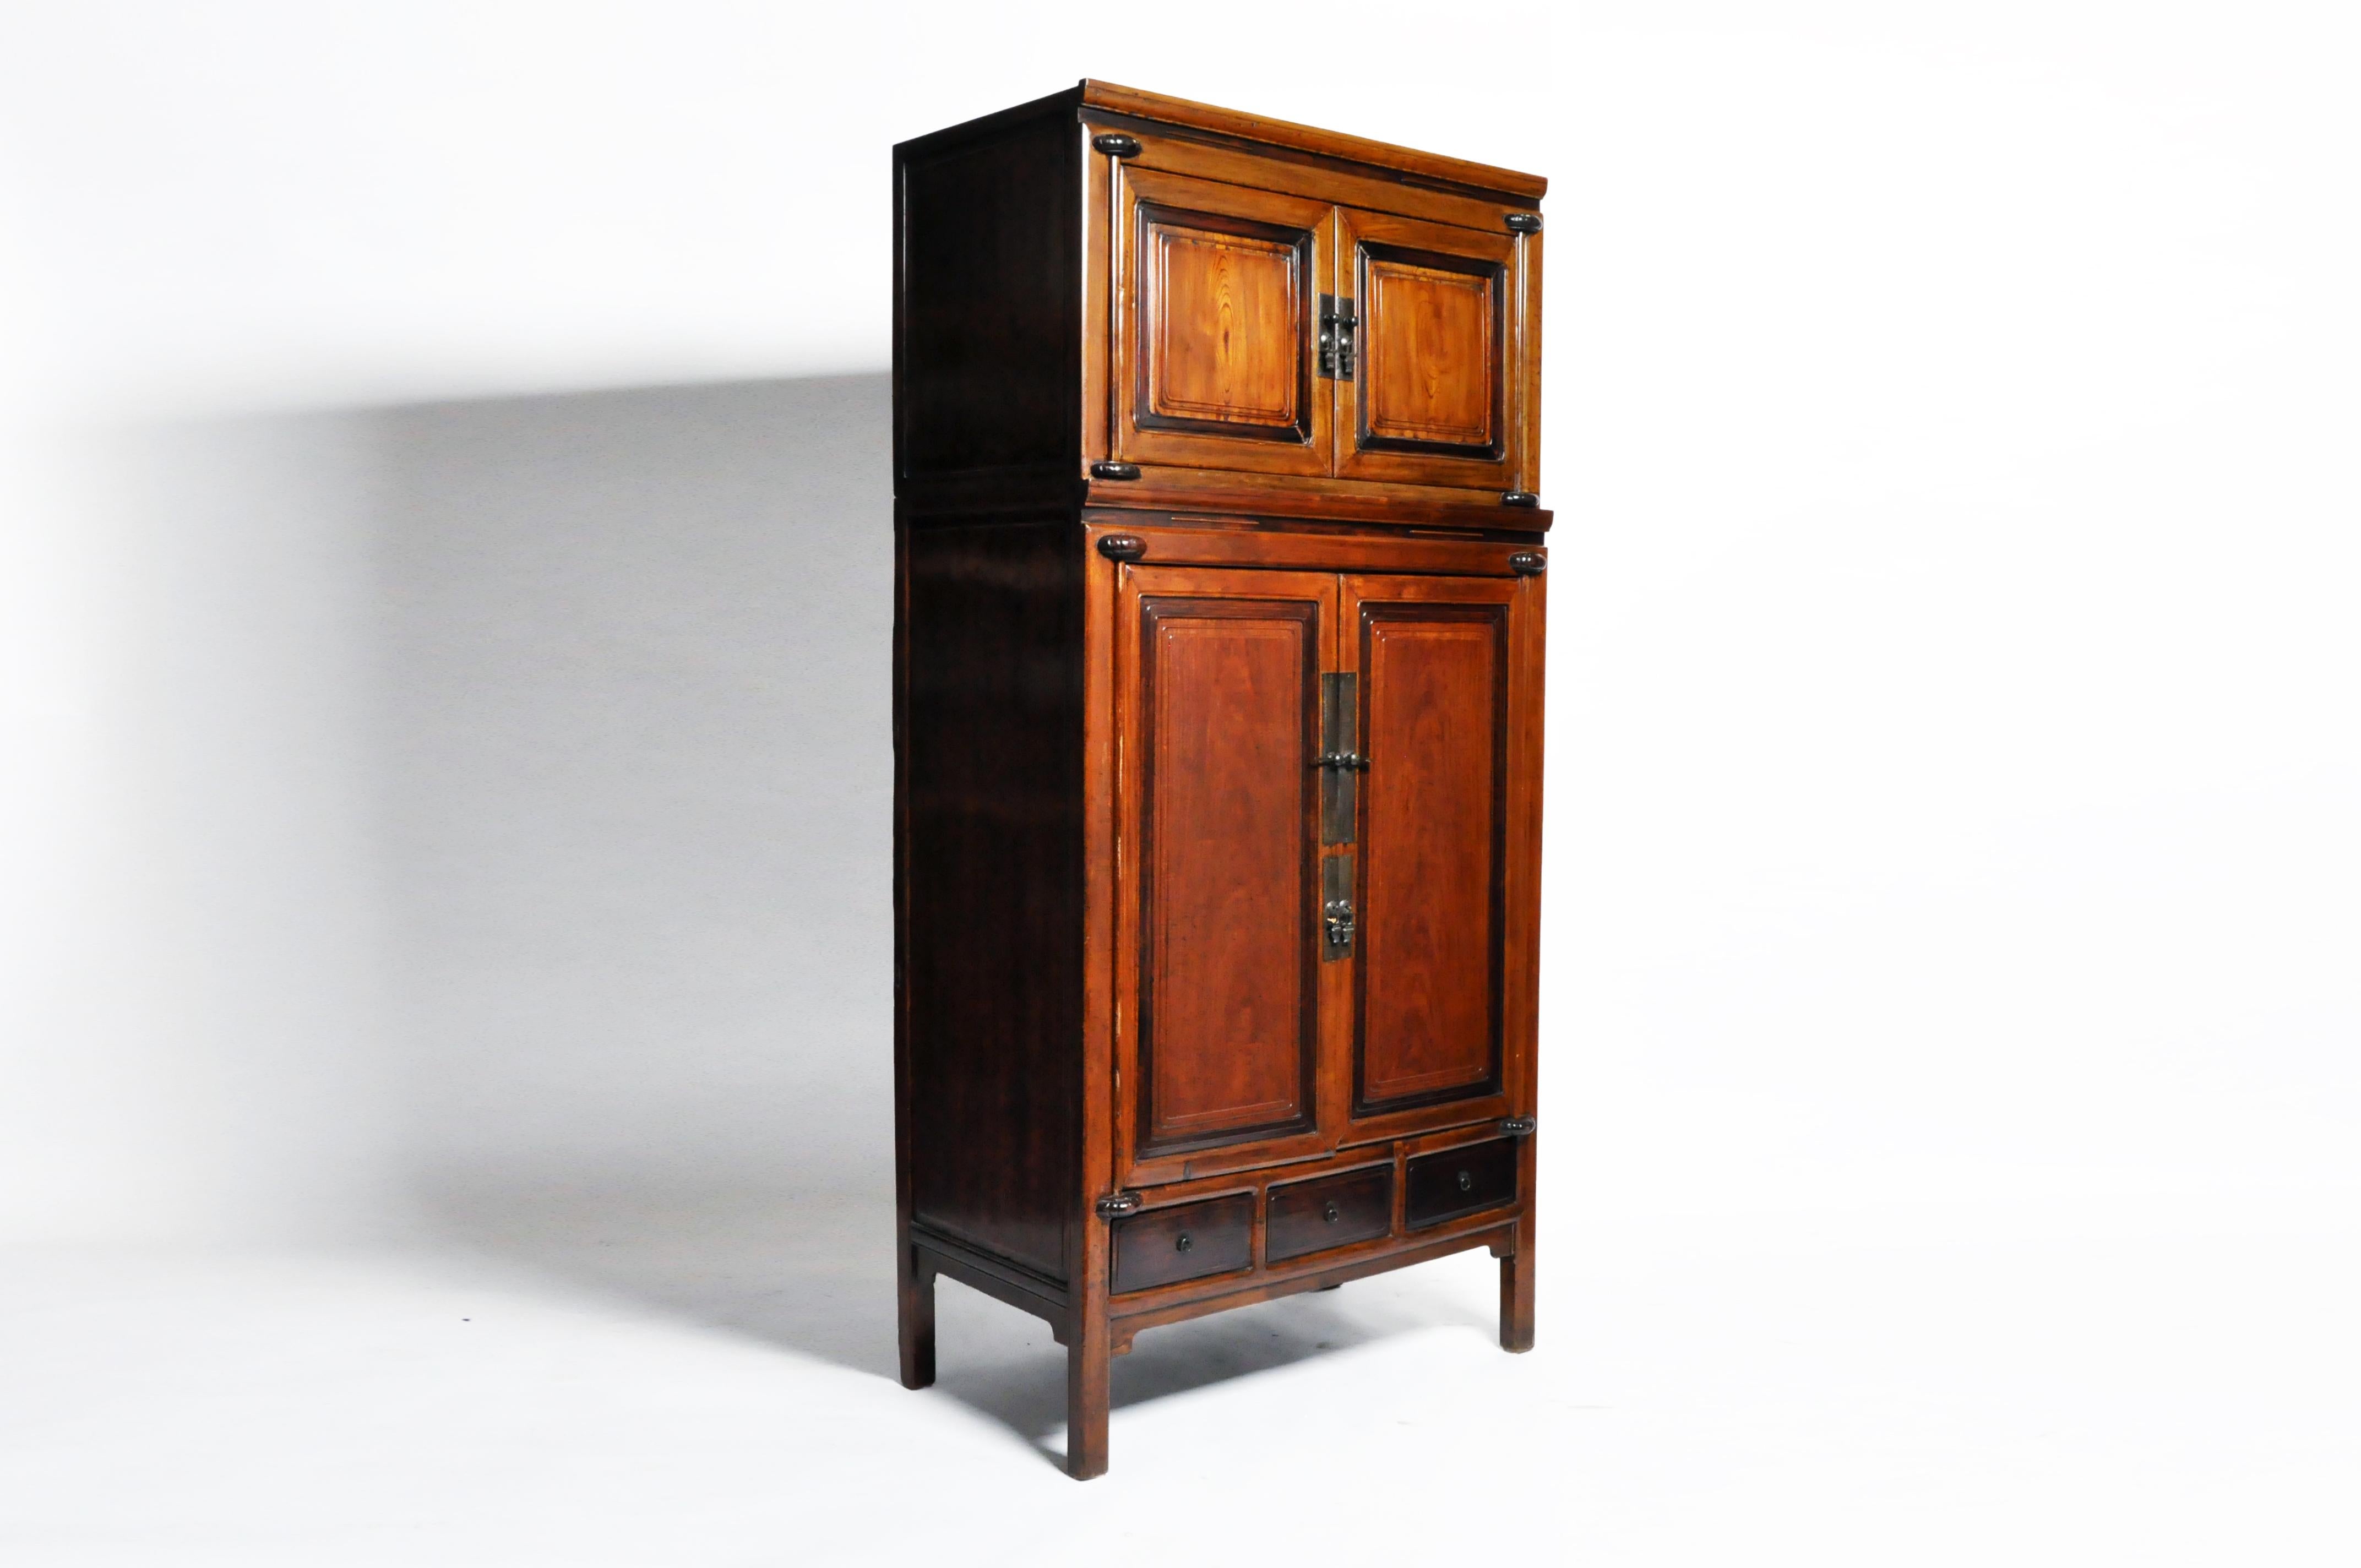 This handsome cabinet is from Ningbo, China and was made from cypress and hauli, circa 1810. The cabinet comes in two sections and features a pair of doors, 5 drawers, and shelves for ample storage. The piece has been restored and has a beautiful